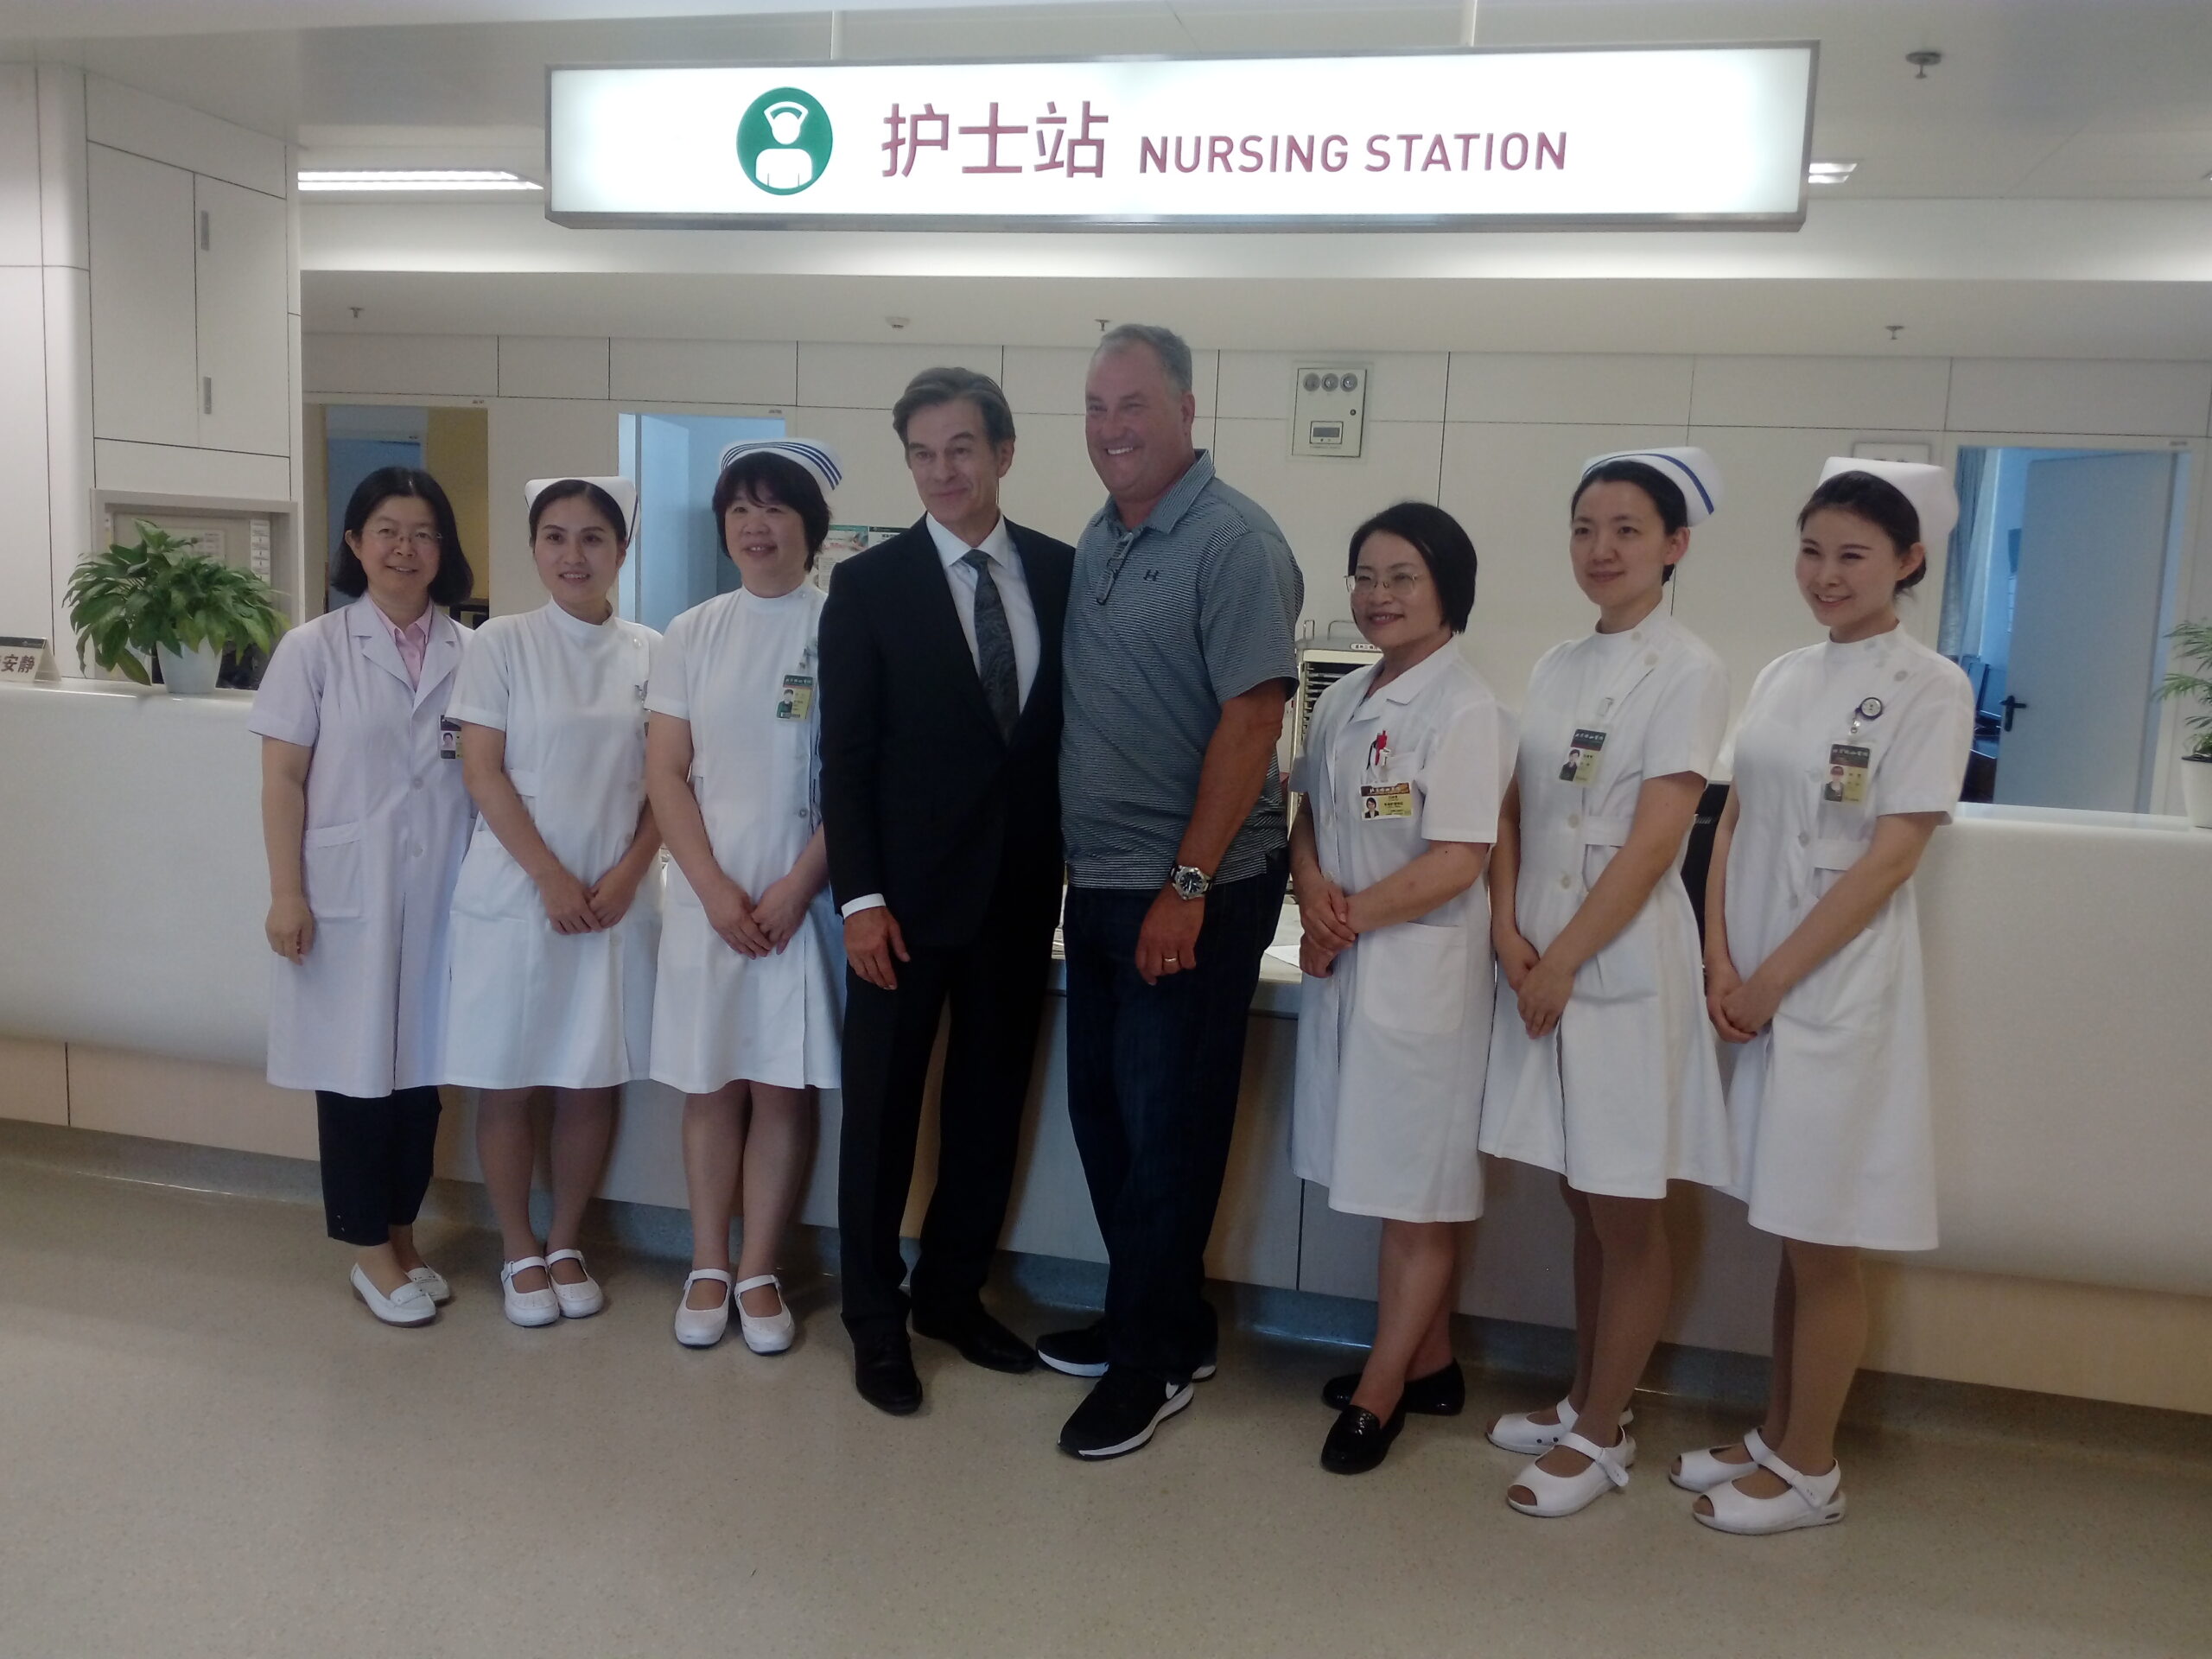 Dr. Oz and the Future of Nursing in China